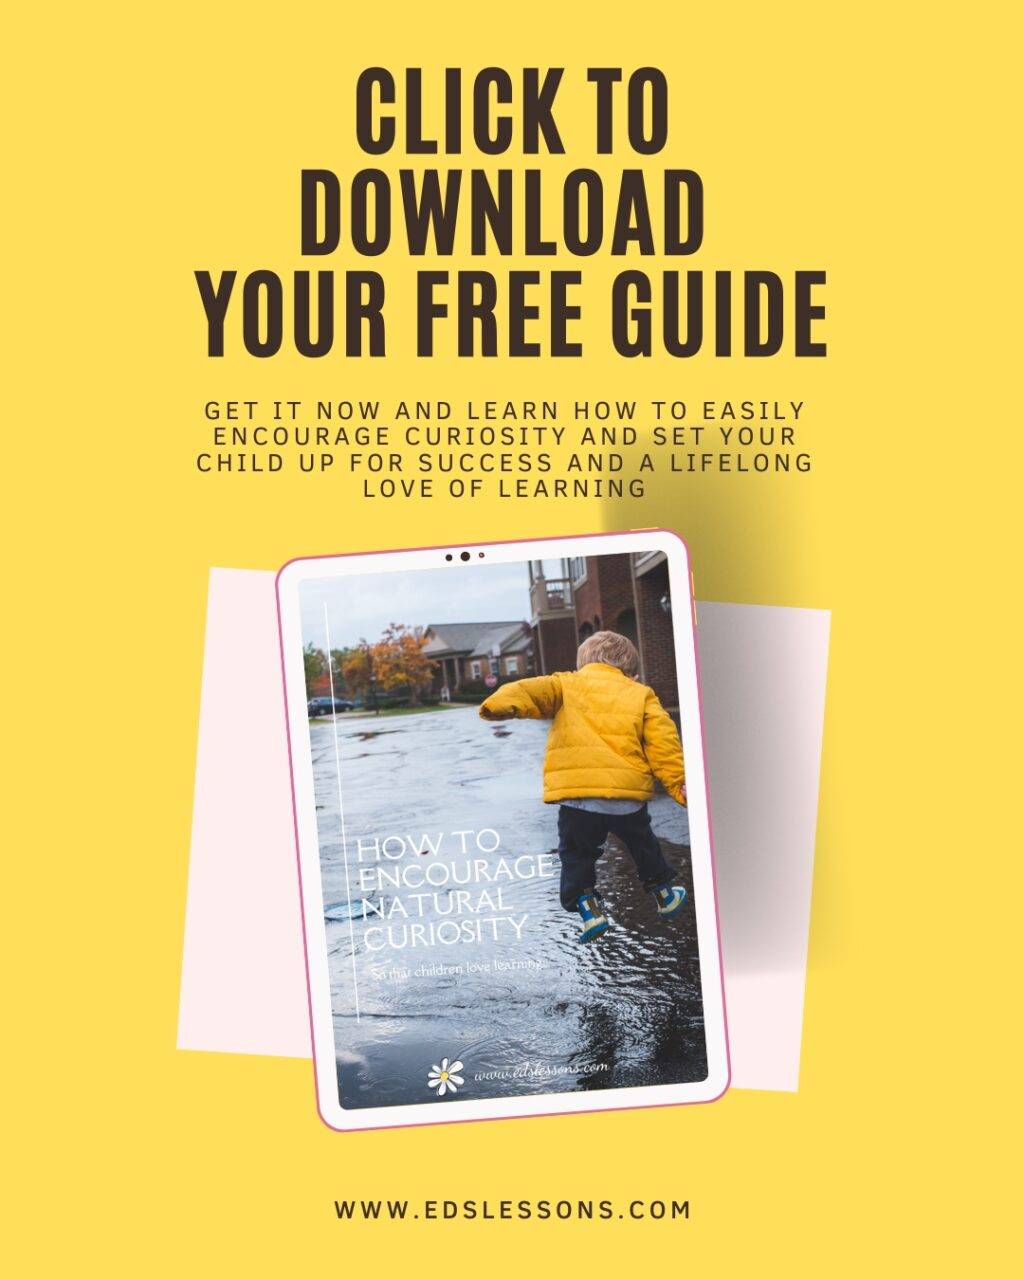 Free e-guide How to encourage natural curiosity